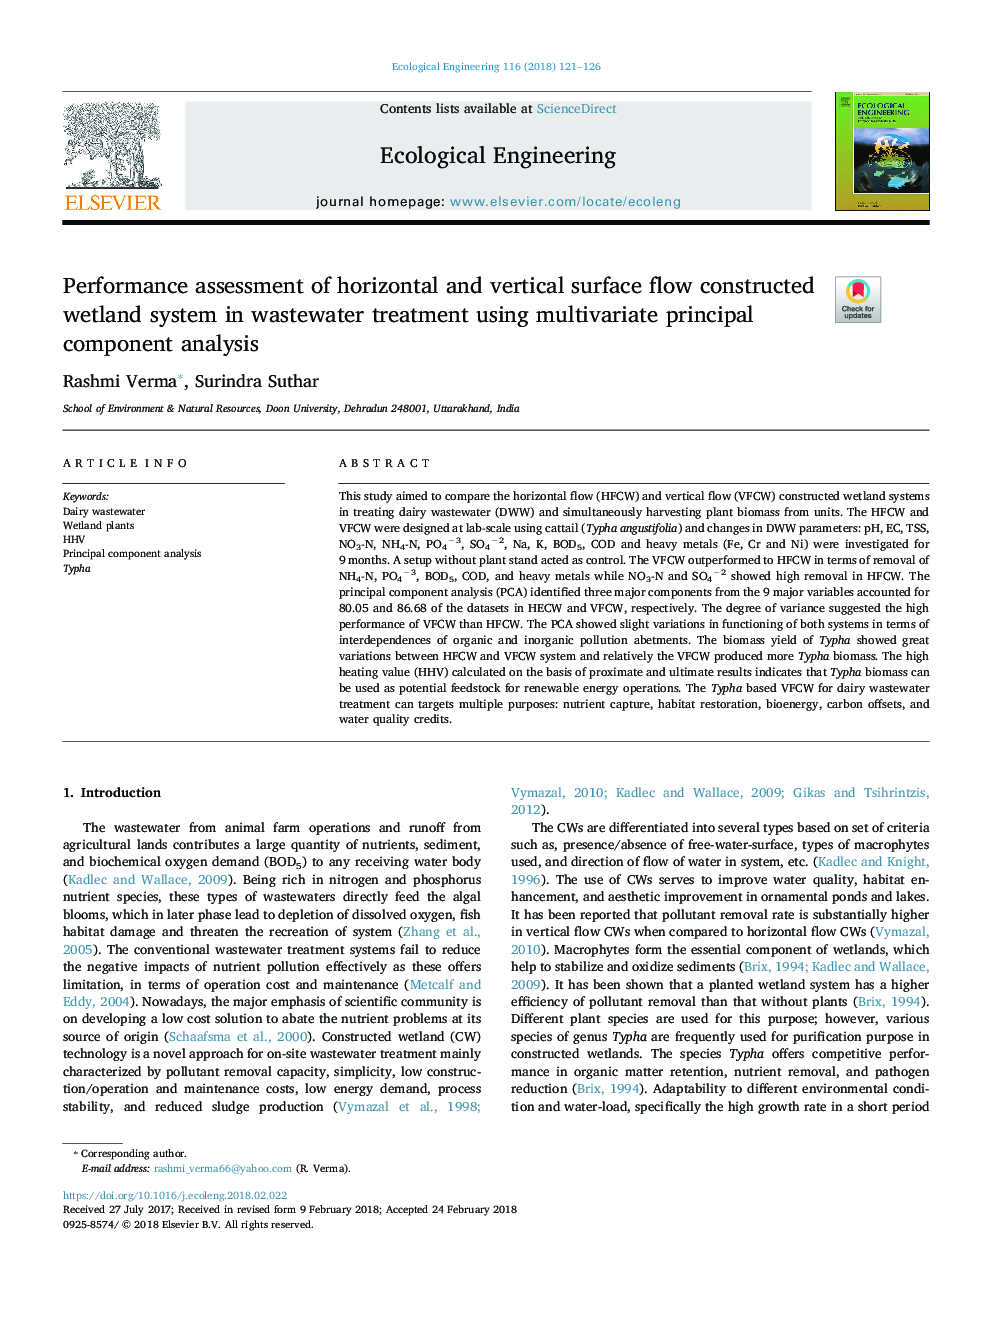 Performance assessment of horizontal and vertical surface flow constructed wetland system in wastewater treatment using multivariate principal component analysis